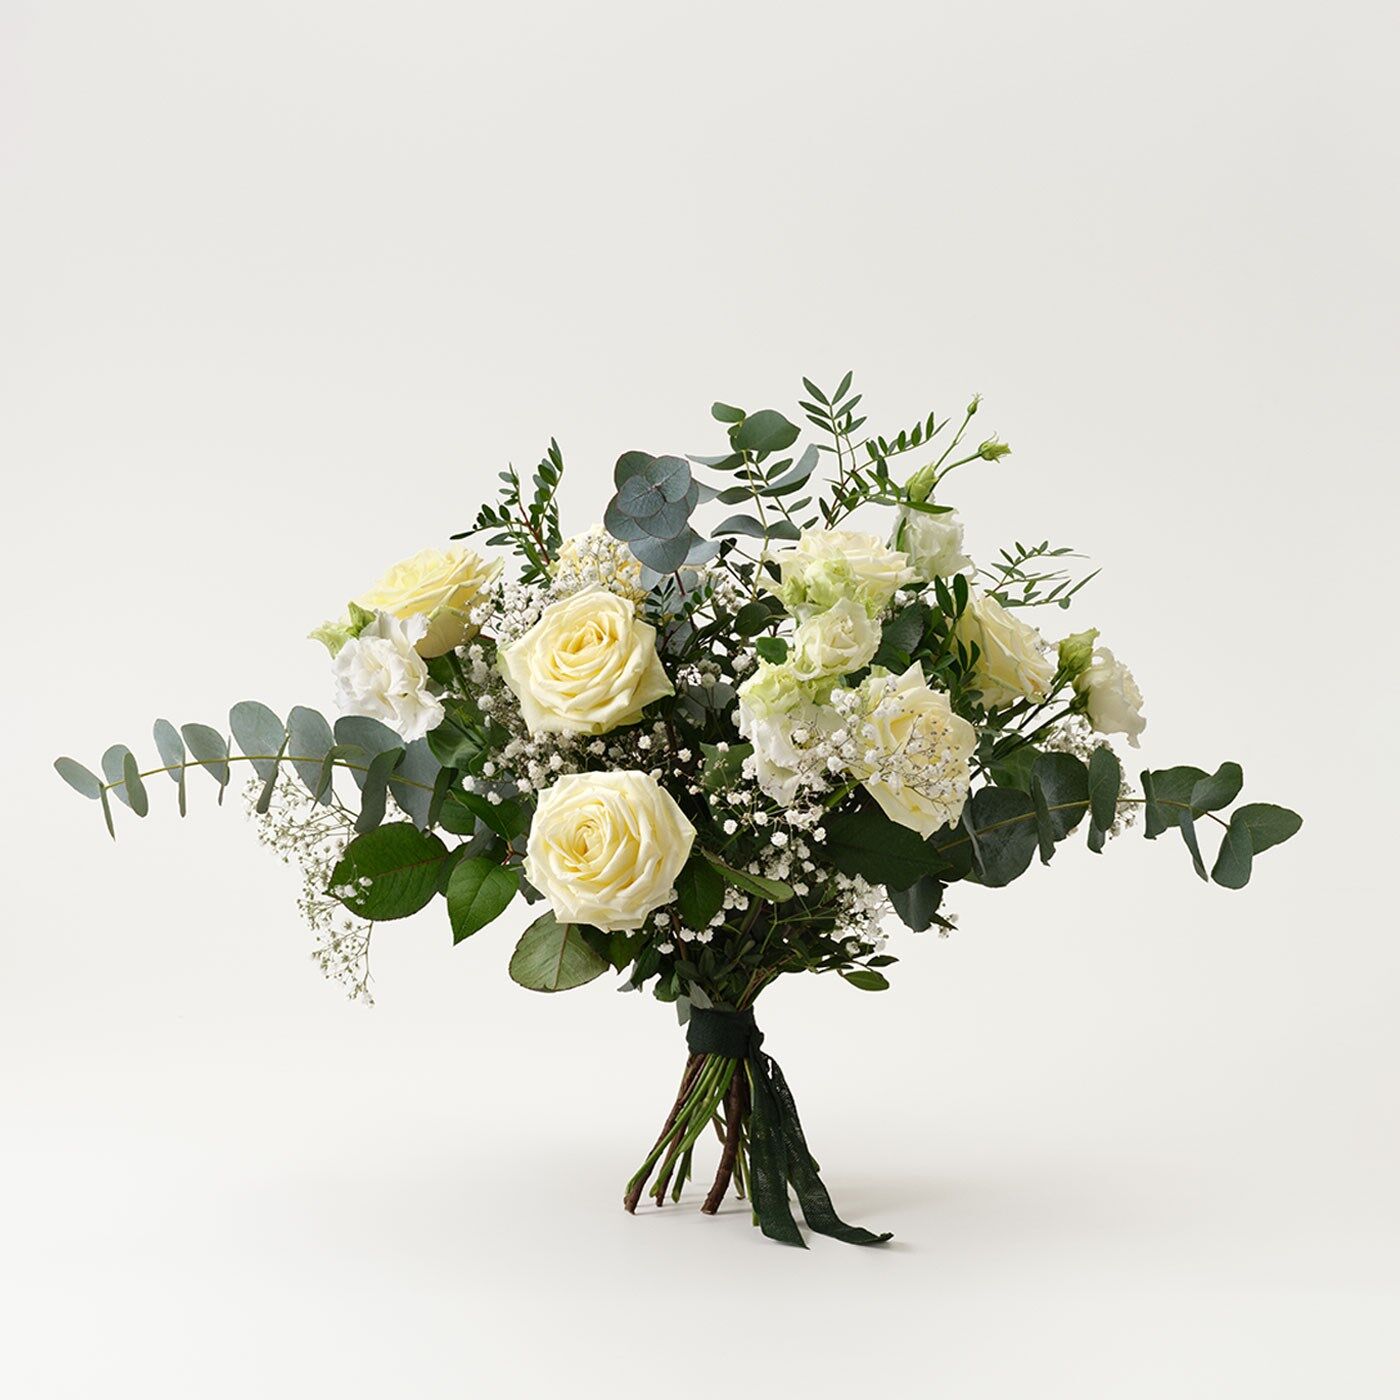 Funeral Bouquet, white rose